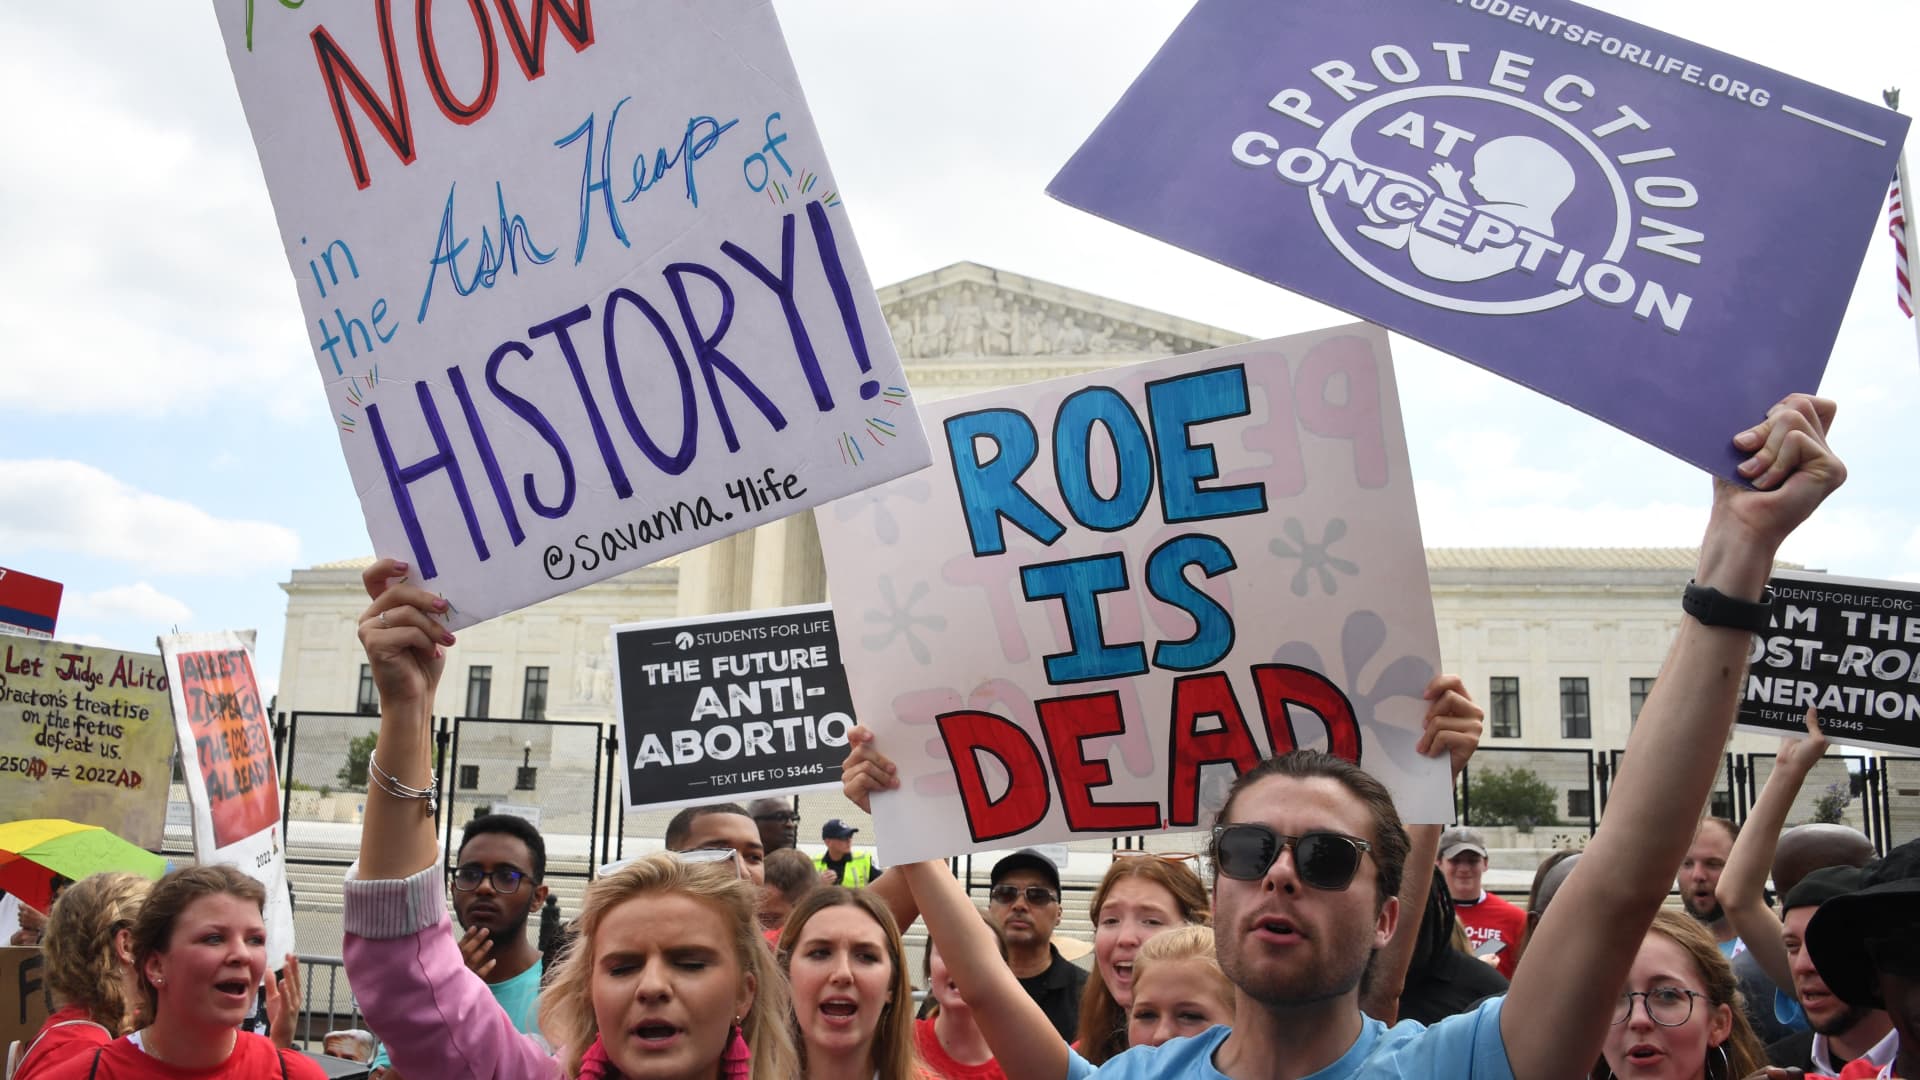 Abortion opponents celebrate outside the U.S. Supreme Court in Washington, D.C., on June 24, 2022.